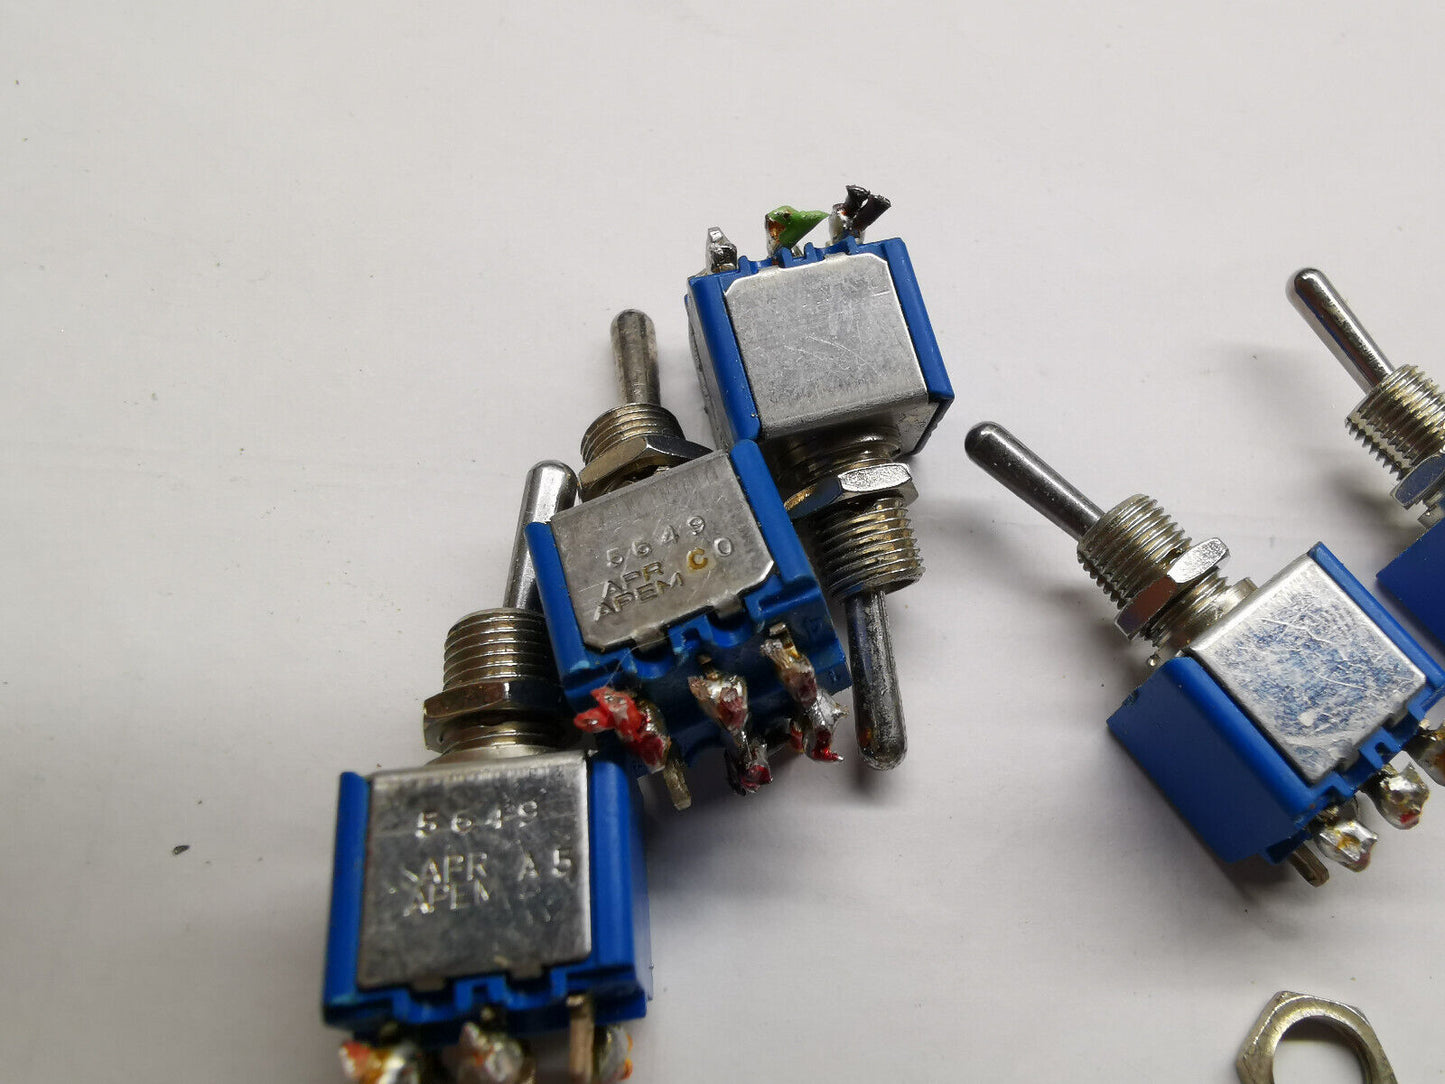 5pcs Of Genuine Apem 5649 Toggle Switch ON OFF ON Type